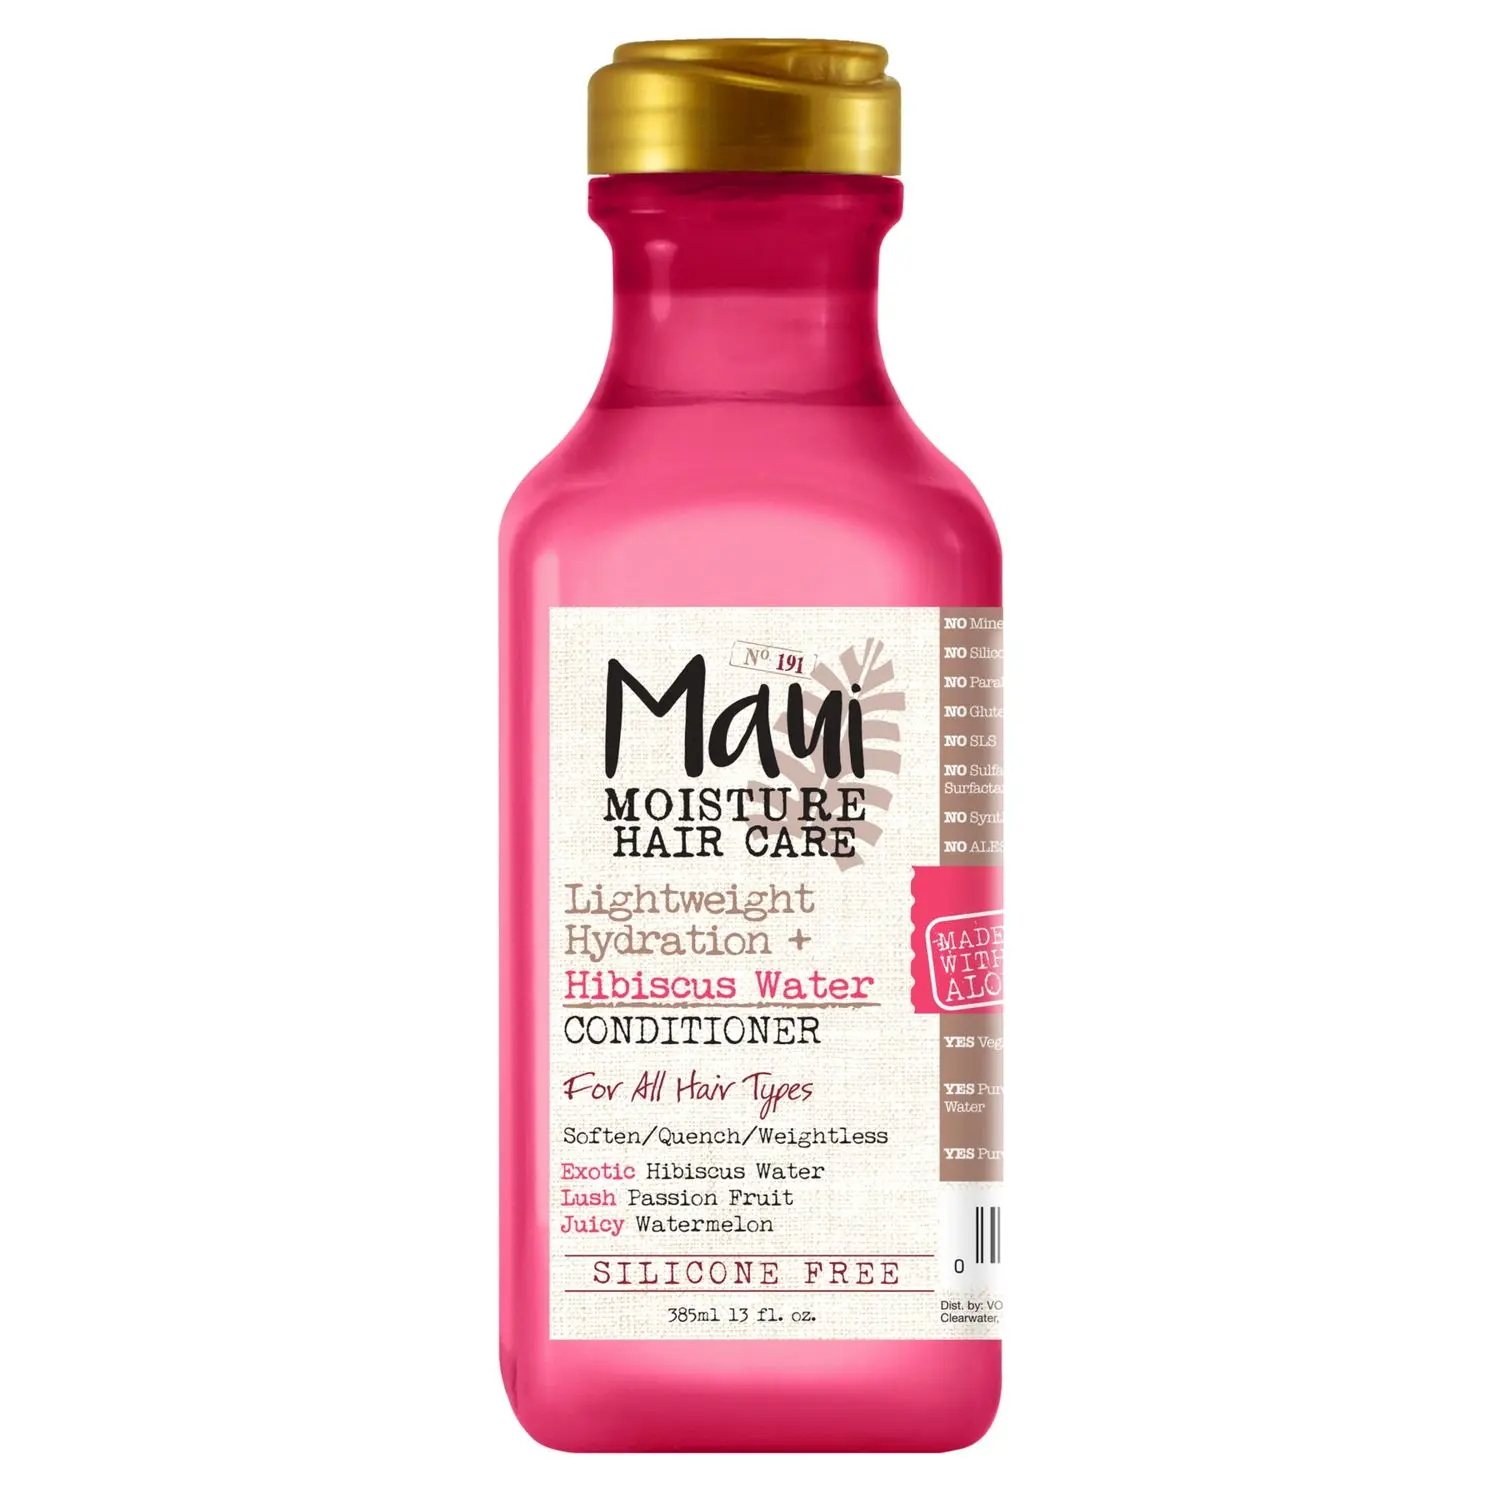 Maui Moisture Lightweight Hydration Hibiscus Water Conditioner made with Aloe Vera, Vegan, Sulphate Free and Paraben Free, 385ml